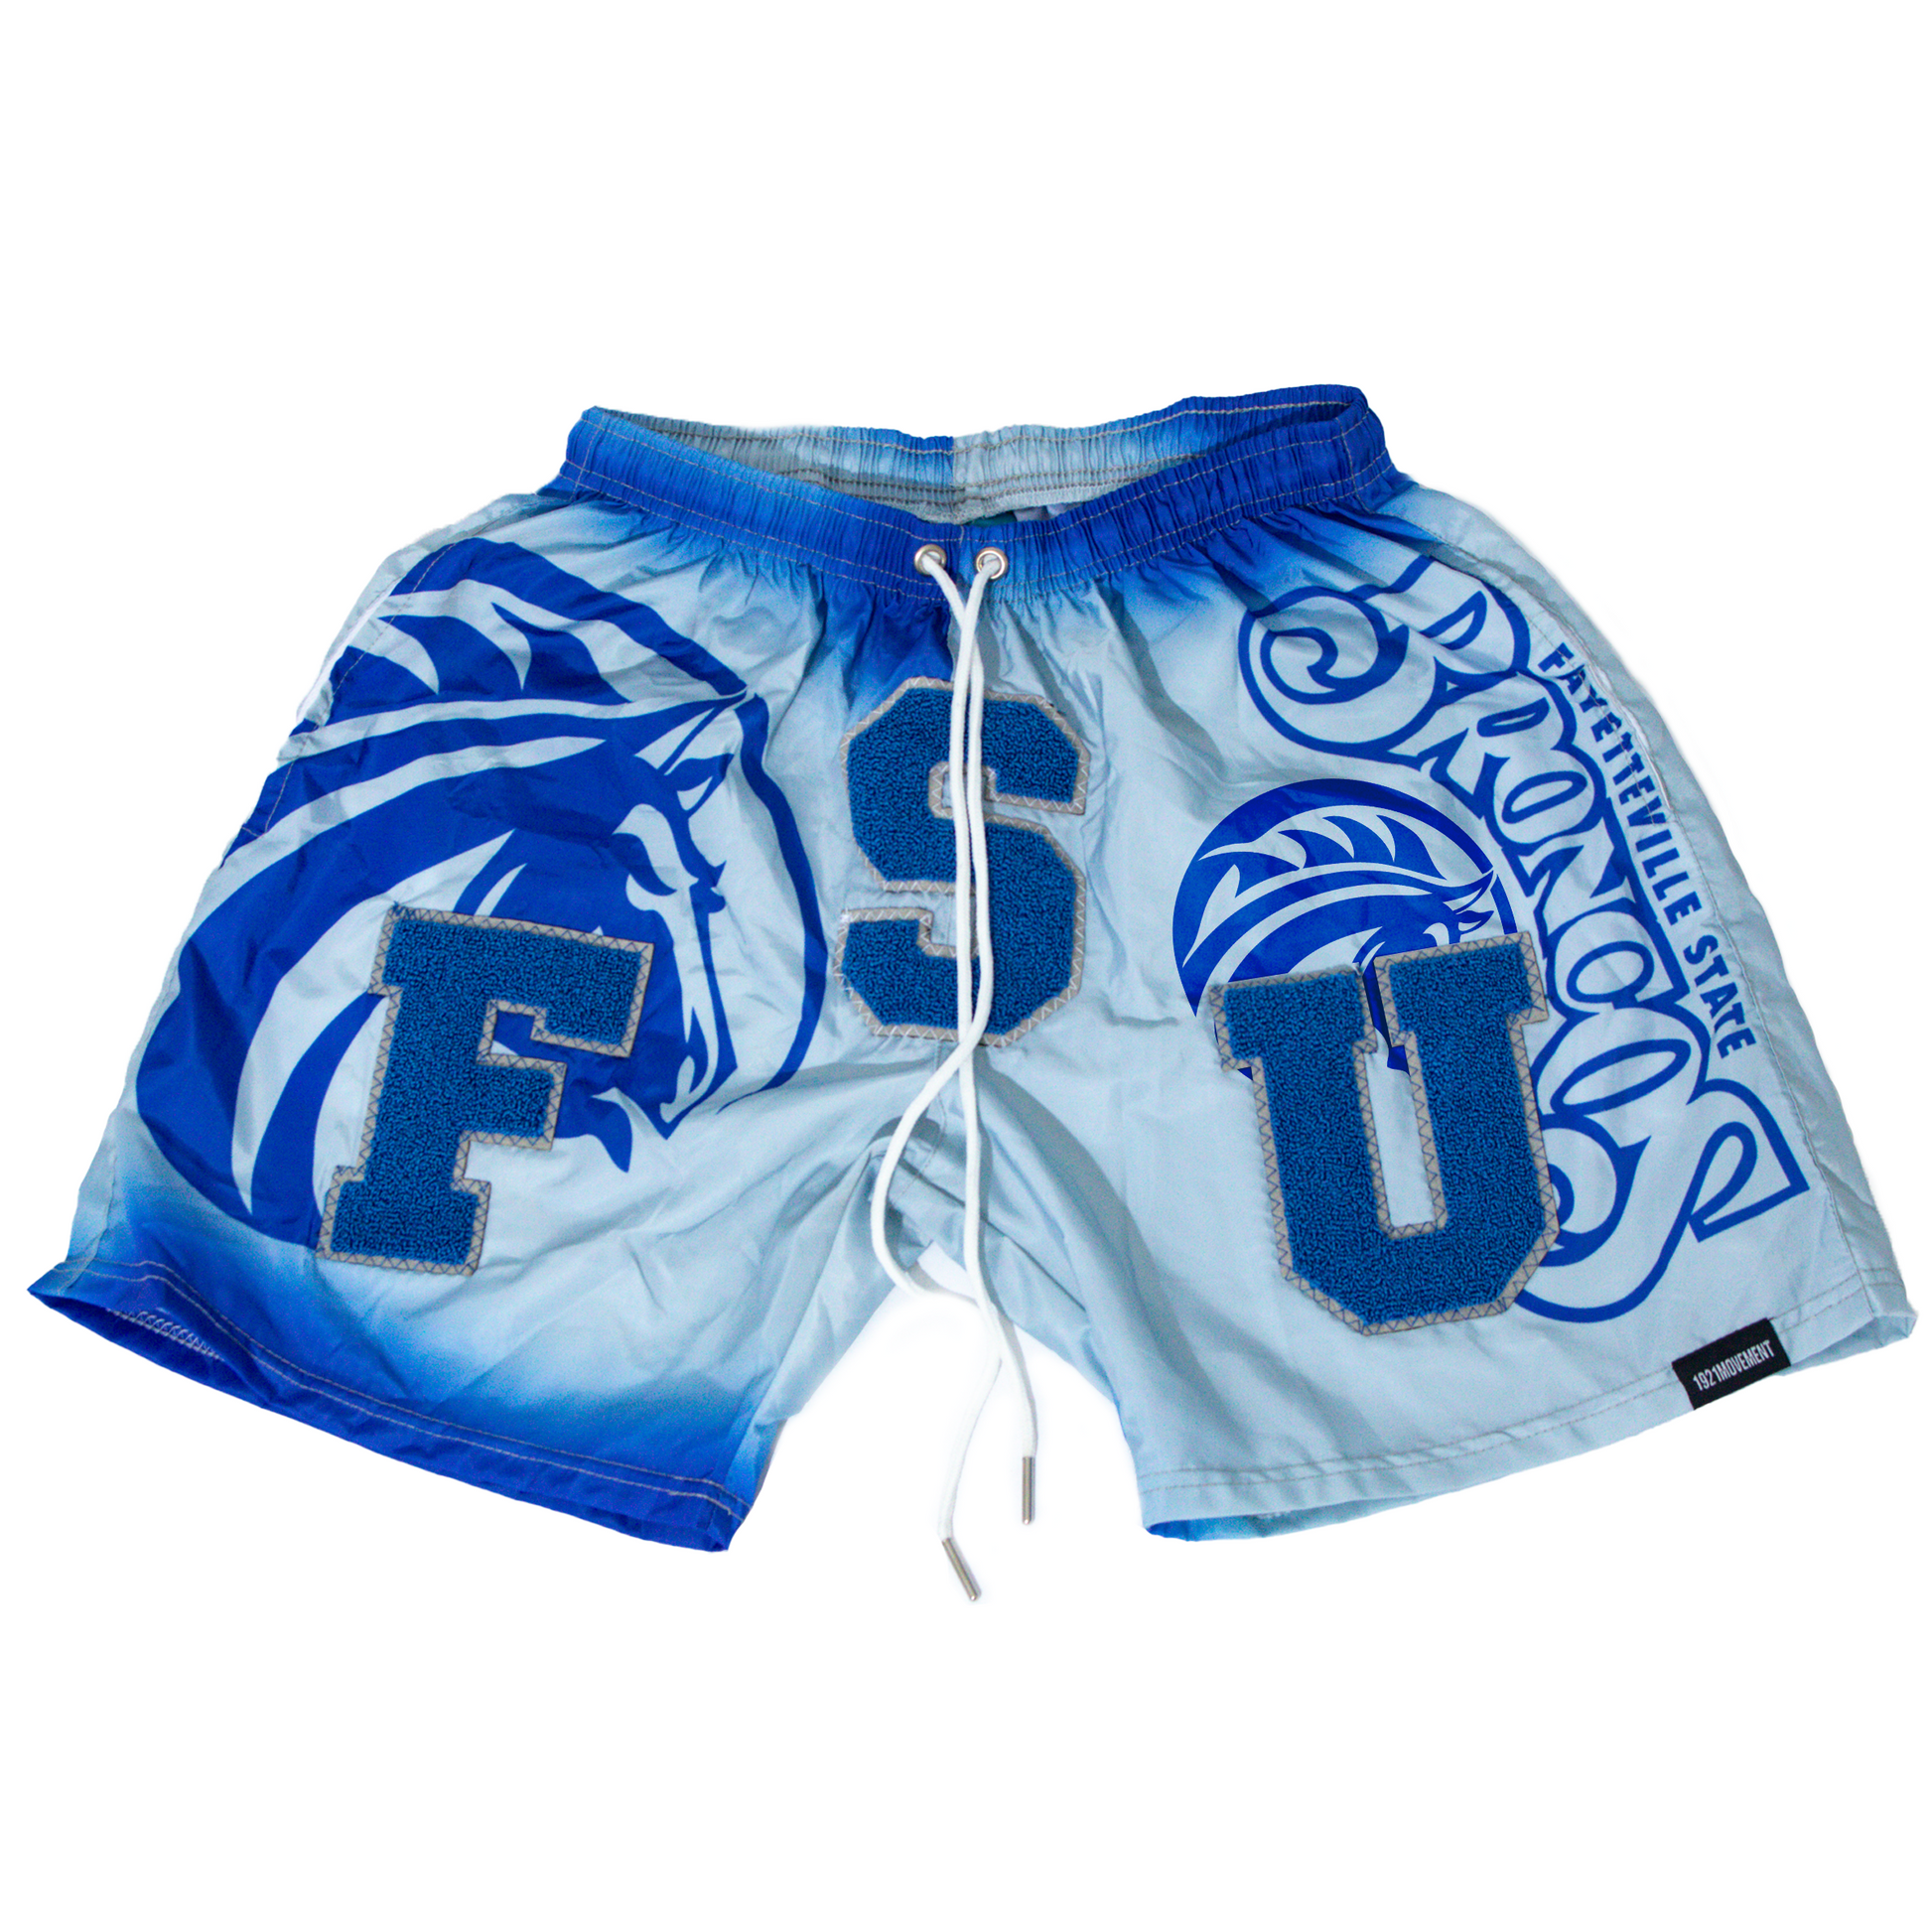 Fayetteville State Shorts - Fayetteville State Apparel and Clothing - 1921 movement